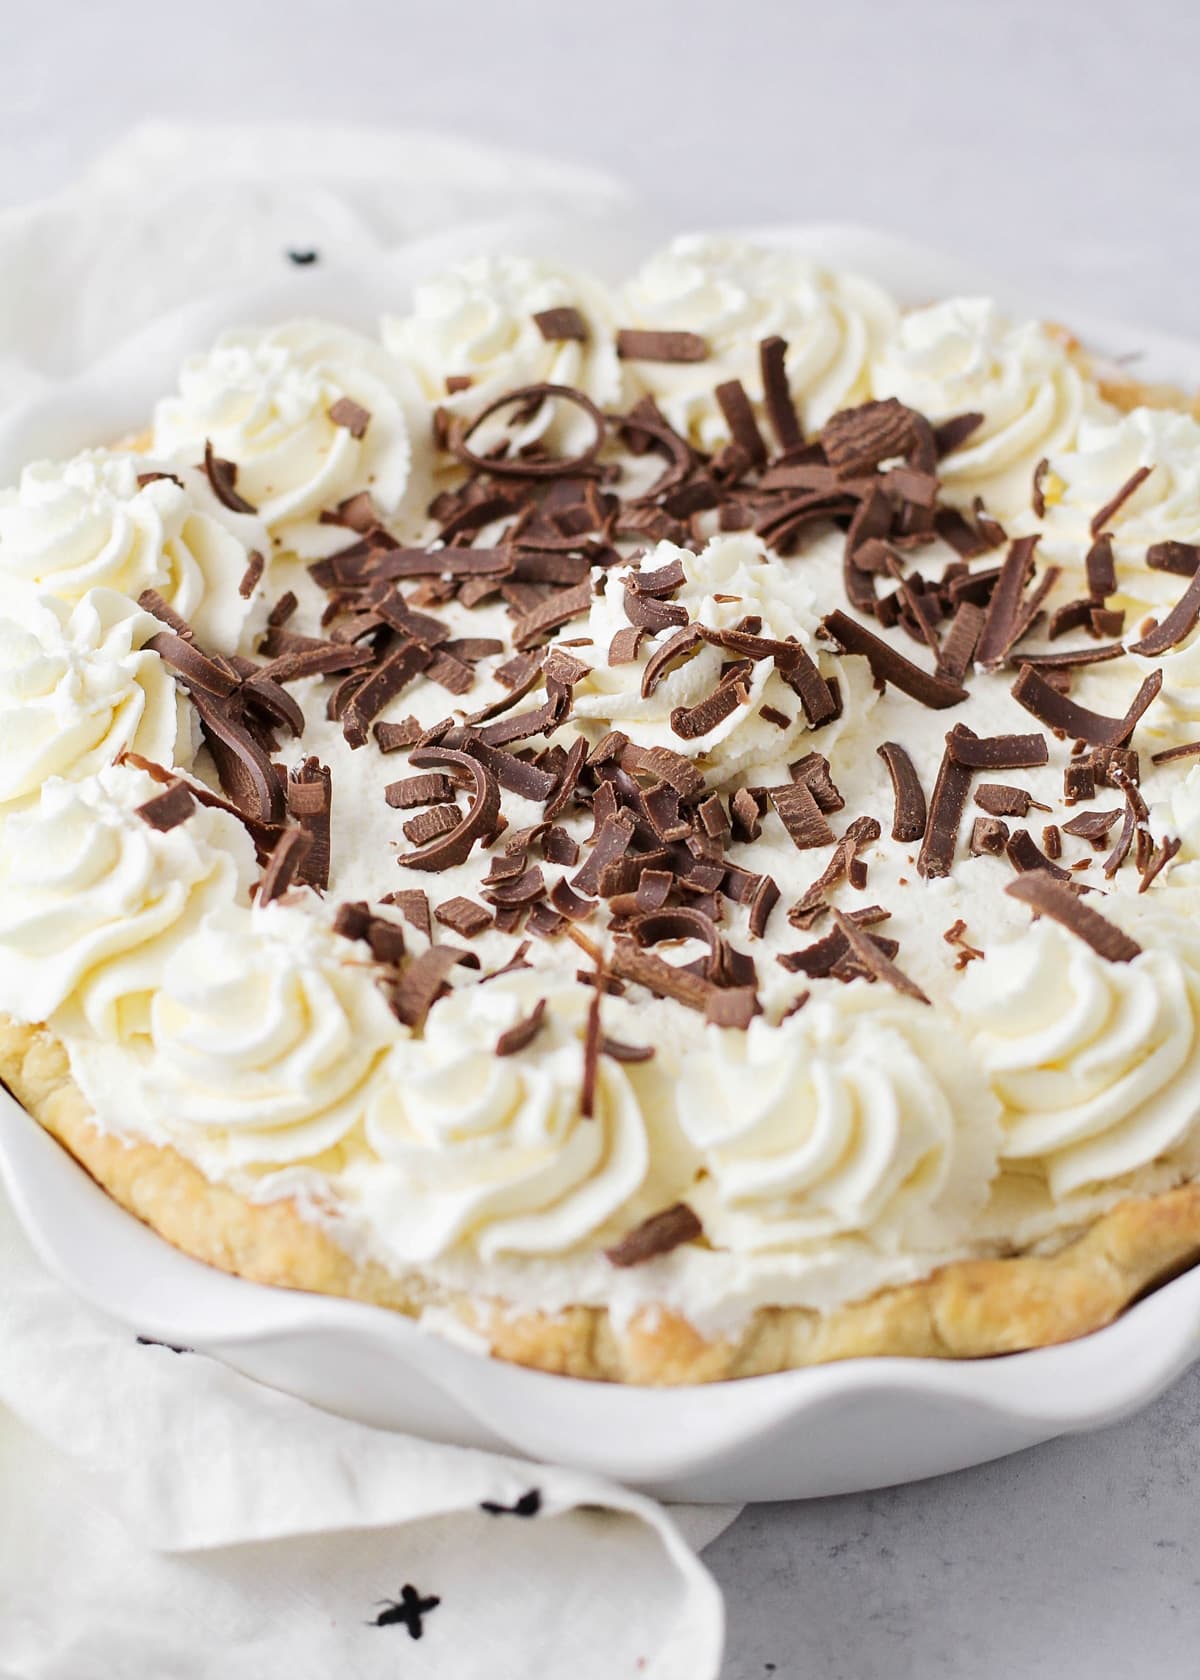 A close up of a chocolate cream pie recipe topped with whipped cream and chocolate curls.